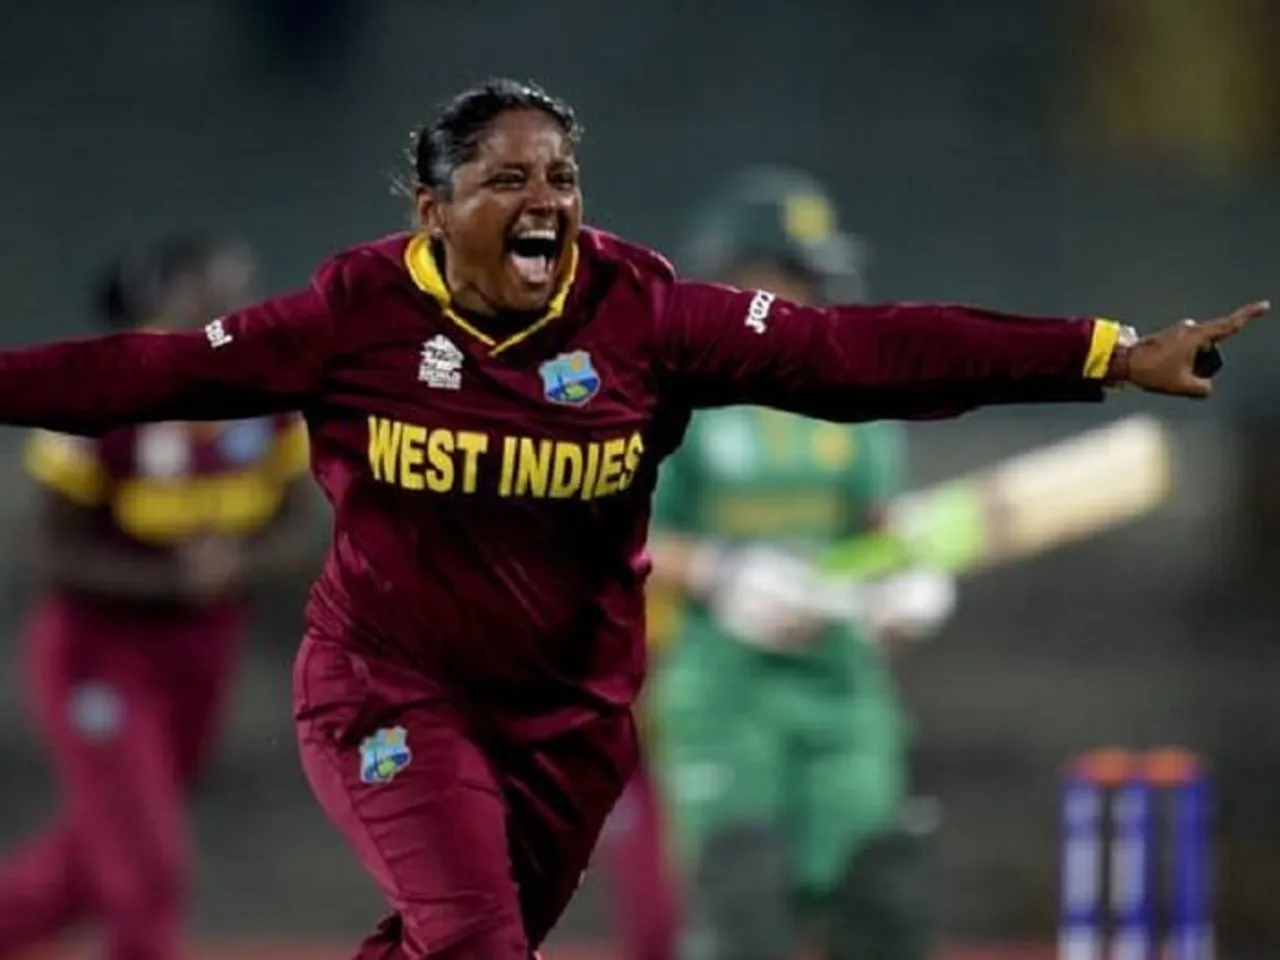 Story of Anisa Mohammed West Indies cricketer